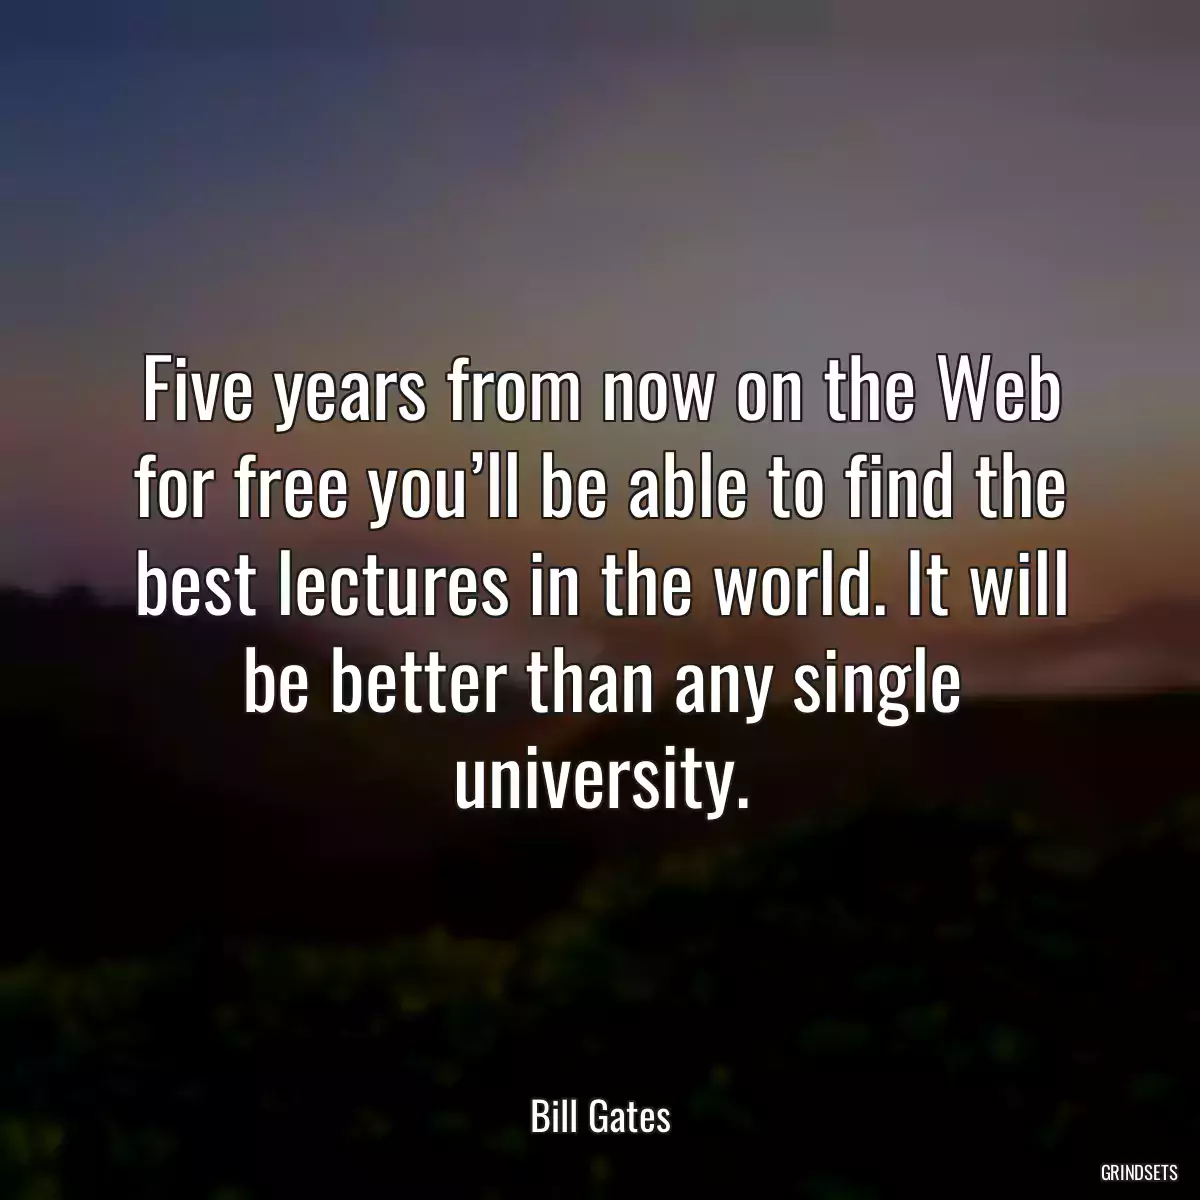 Five years from now on the Web for free you’ll be able to find the best lectures in the world. It will be better than any single university.